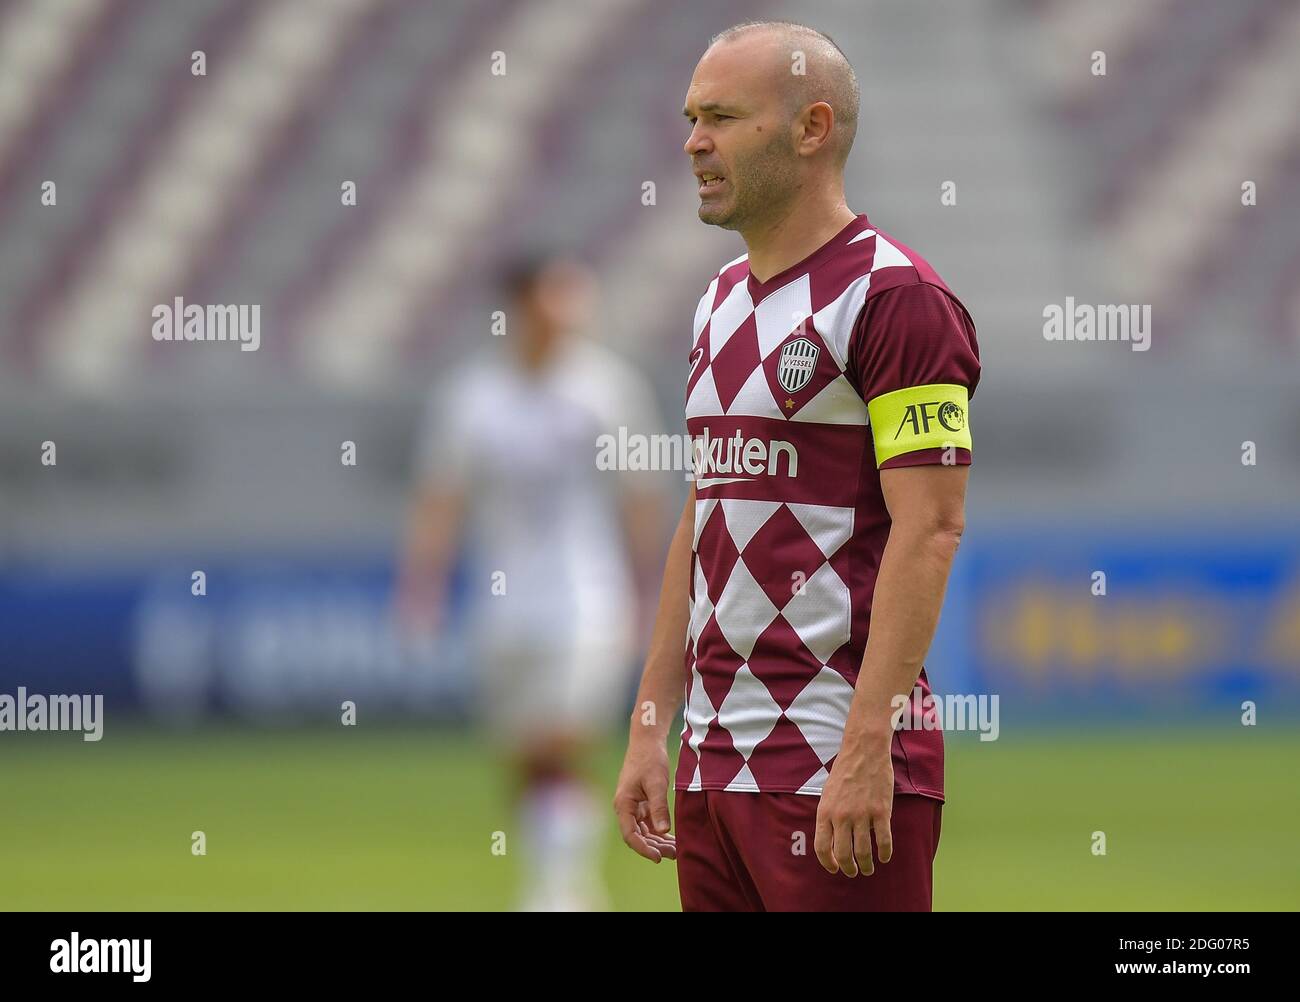 Doha, Qatar. 7th Dec, 2020. Andres Iniesta of Vissel Kobe reacts during the round of 16 match of the AFC Champions League between Shanghai SIPG FC of China and Vissel Kobe of Japan in Doha, Qatar, Dec. 7, 2020. Credit: Nikku/Xinhua/Alamy Live News Stock Photo